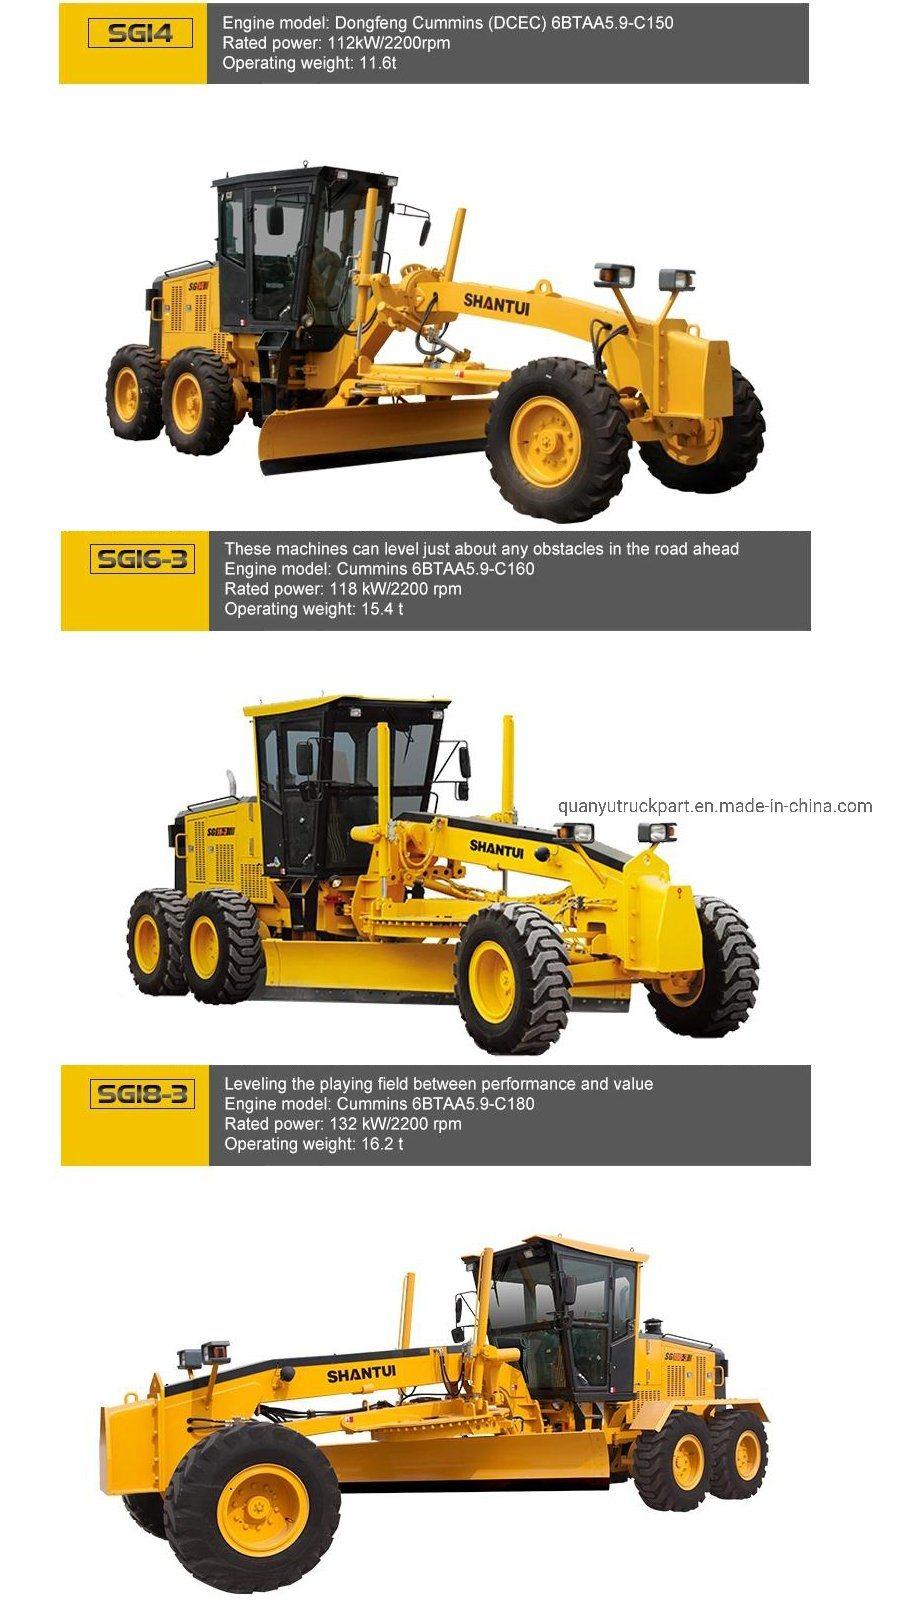 China Machinery Sg18-3 Shantui Motor Grader with Ripper and Blade